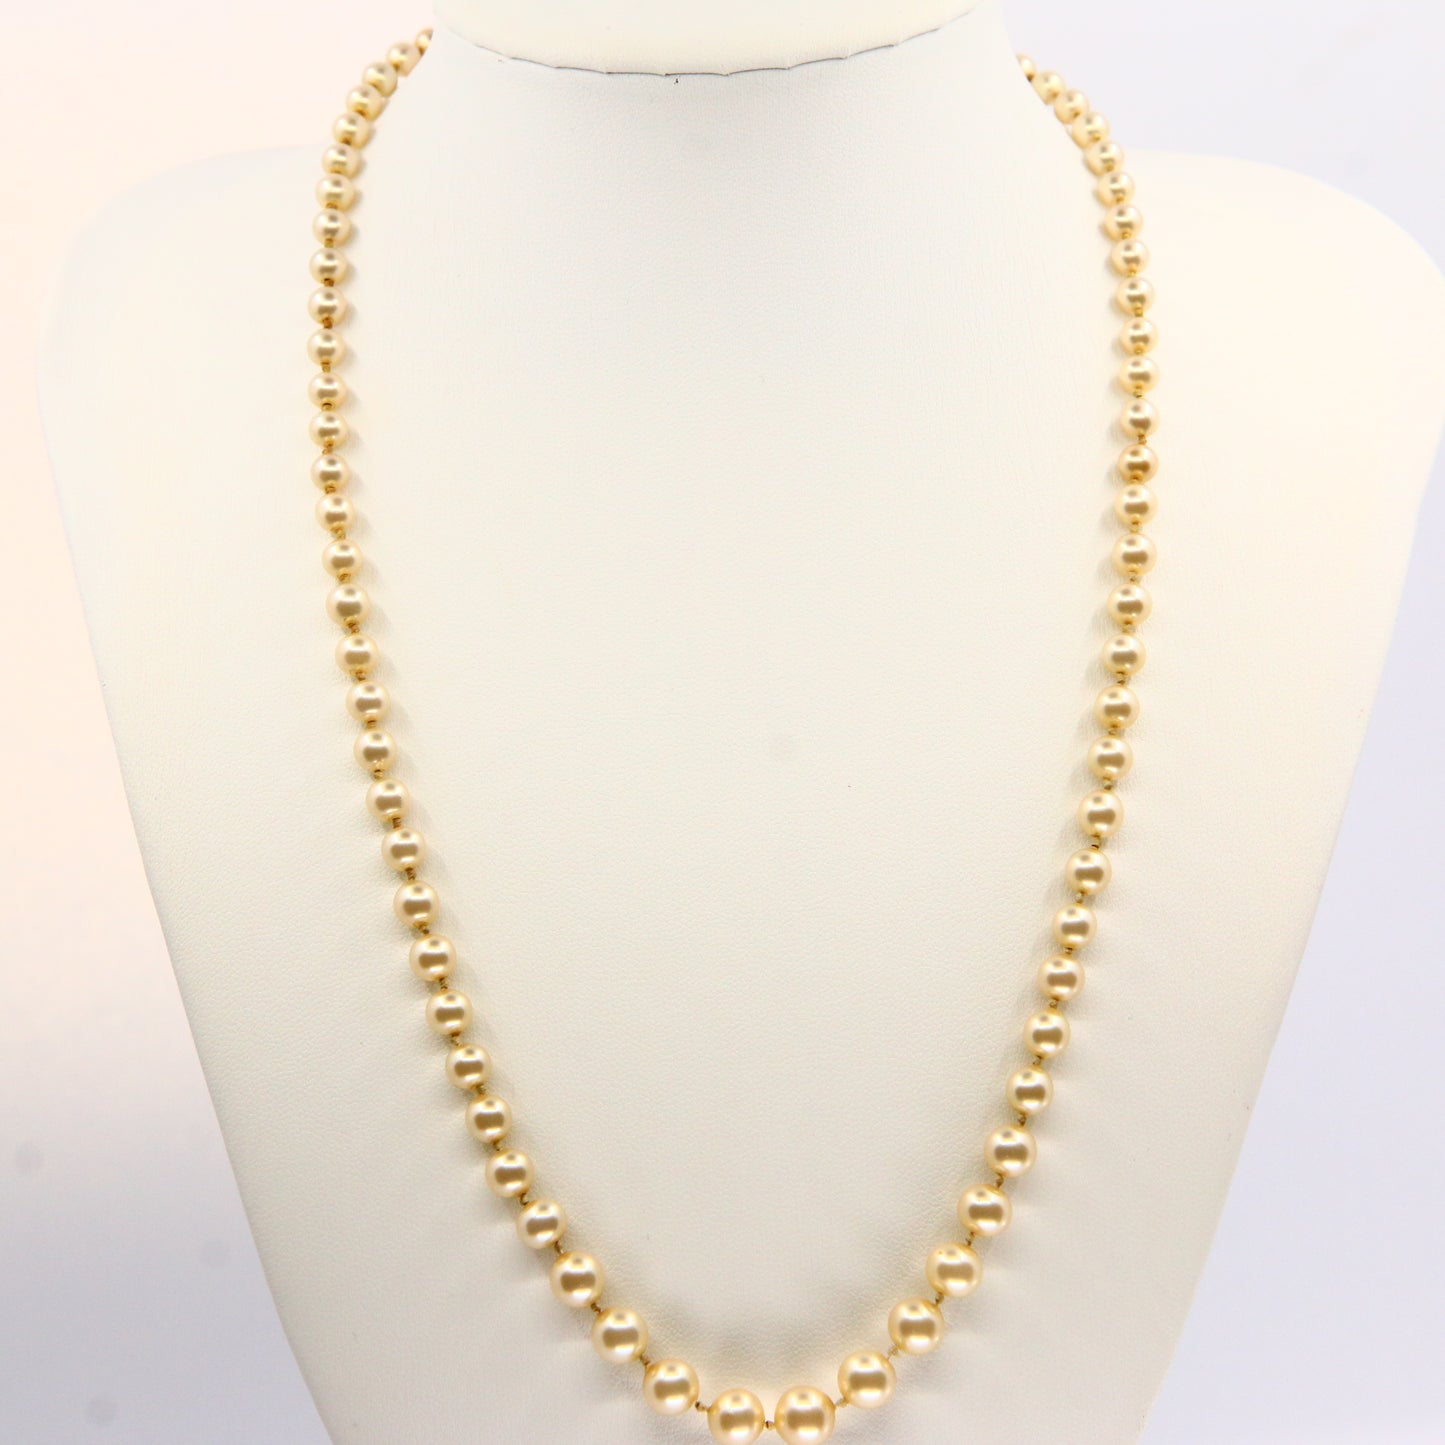 Vintage 9ct Ciro Pearl Necklace 19.5 Inch Graduated Beads Yellow Gold Boxed